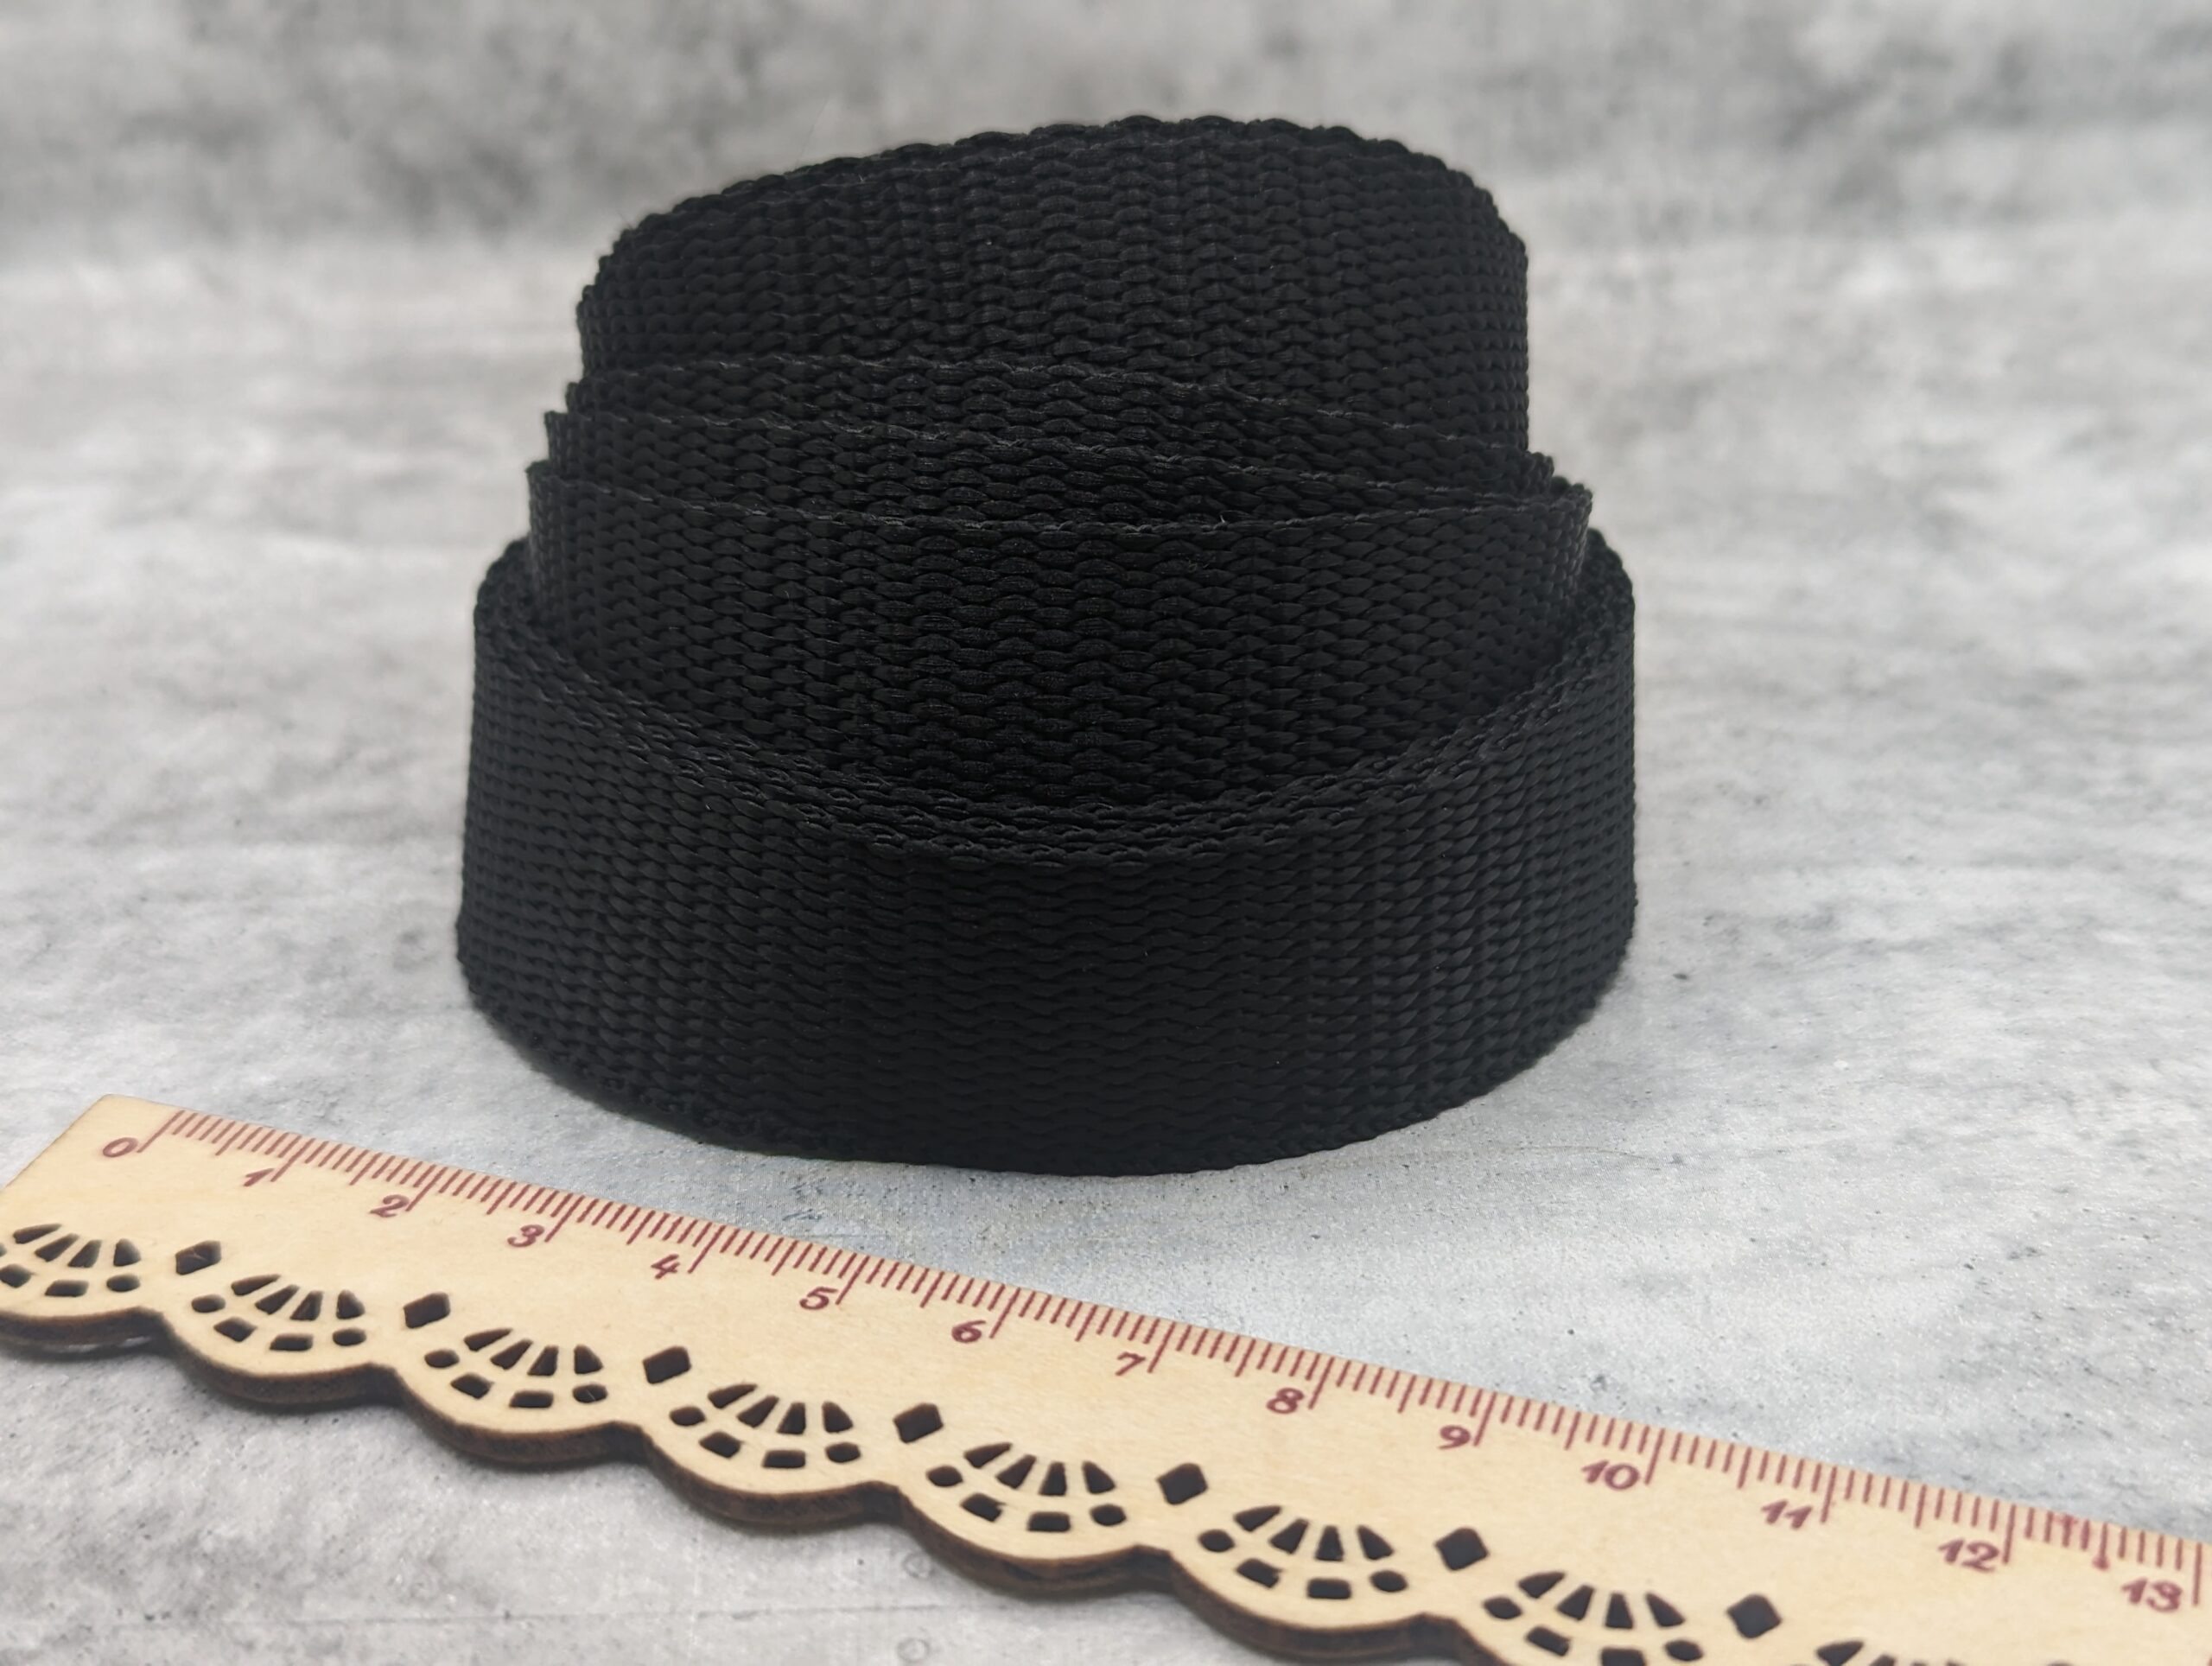 1 inch Polypropylene Strapping - Black with Ruler - Electric Needle Girls